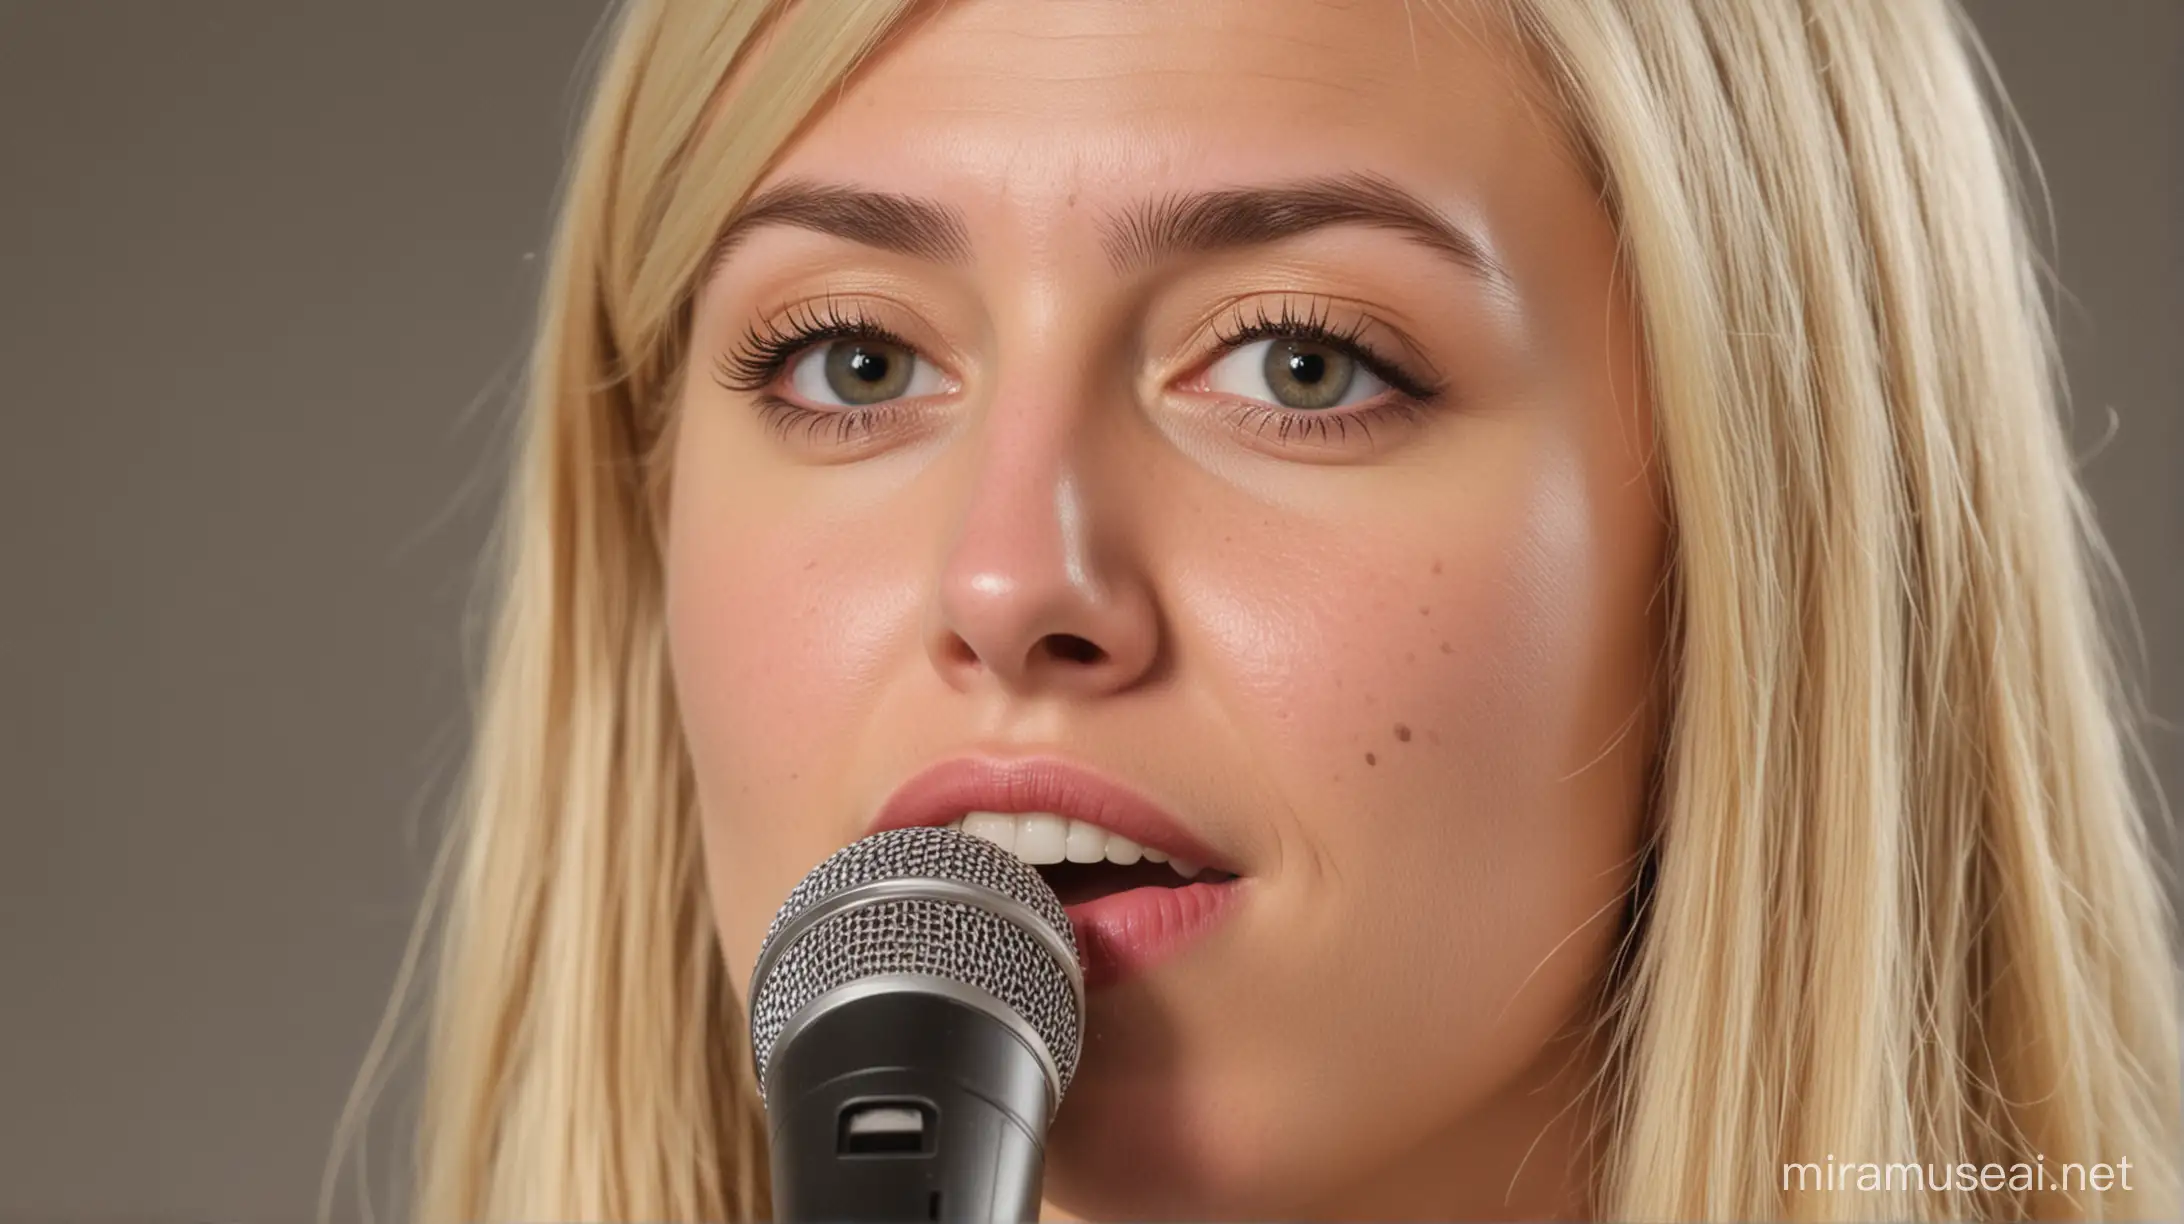 Young Blonde Woman Speaking into Microphone with CloseUp View